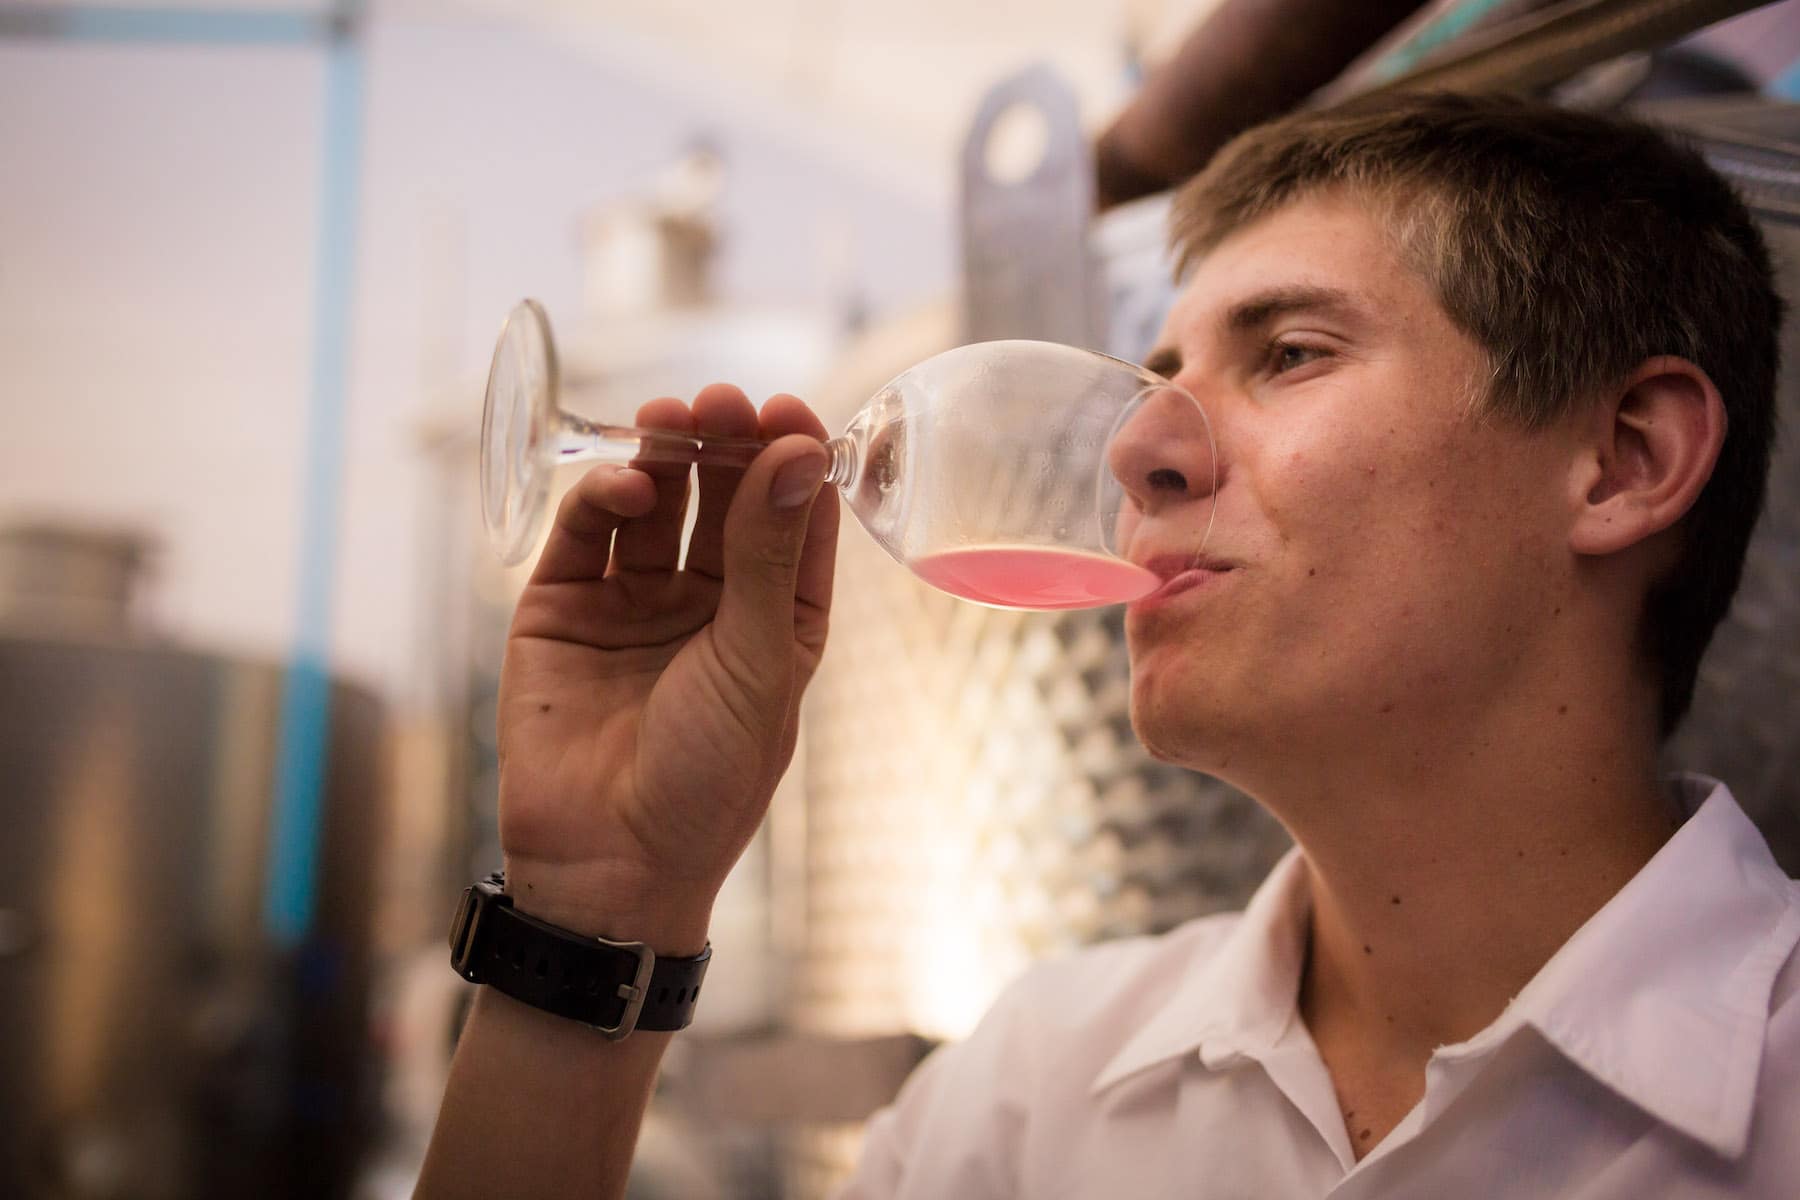 A student tastes the Rosé at about 2% alcohol to get the different characteristics.